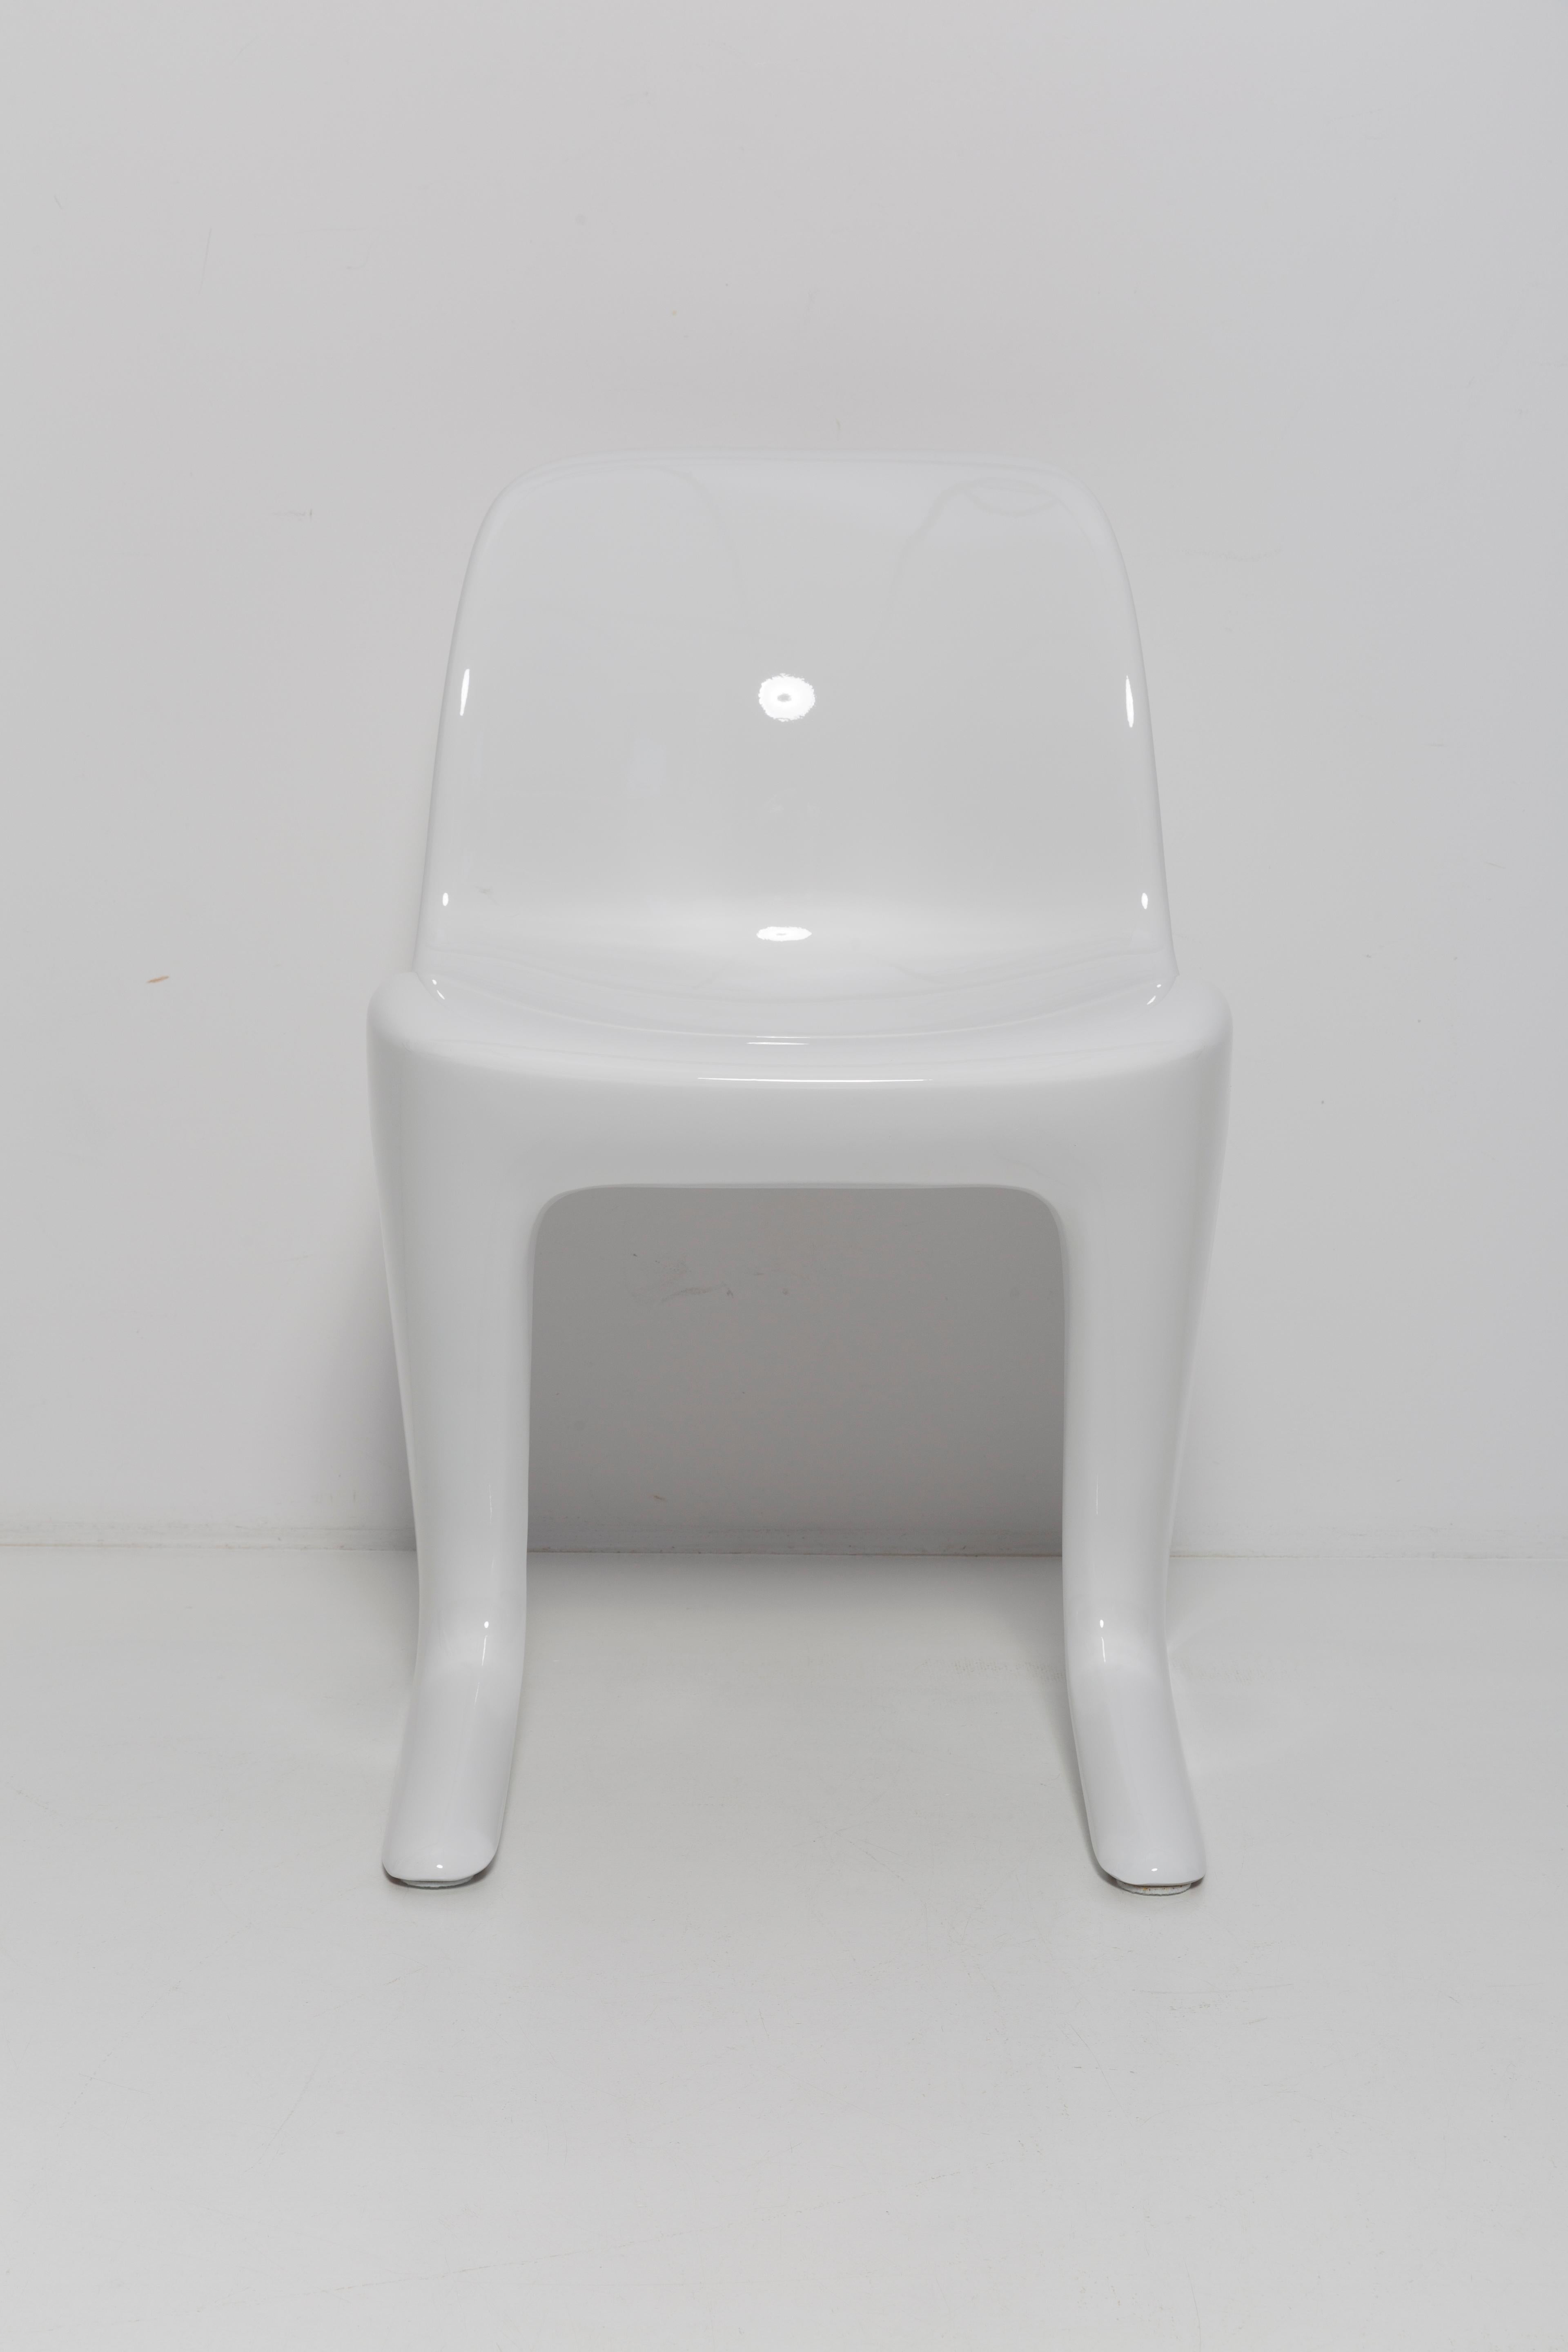 White Glossy Kangaroo Chair Designed by Ernst Moeckl, Germany, 1960s For Sale 4